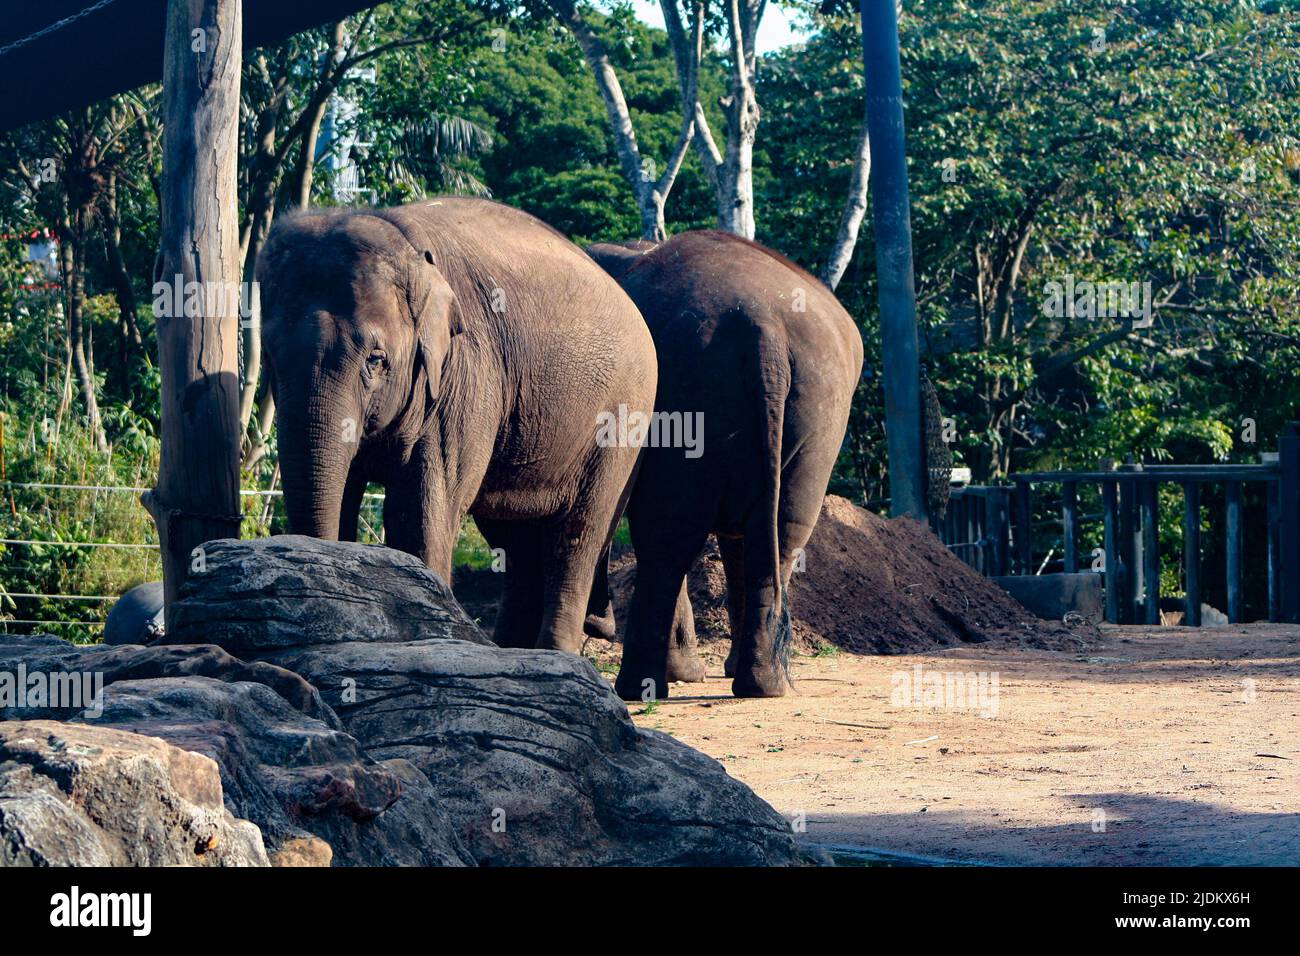 Two elephants standing together next to some rocks Stock Photo